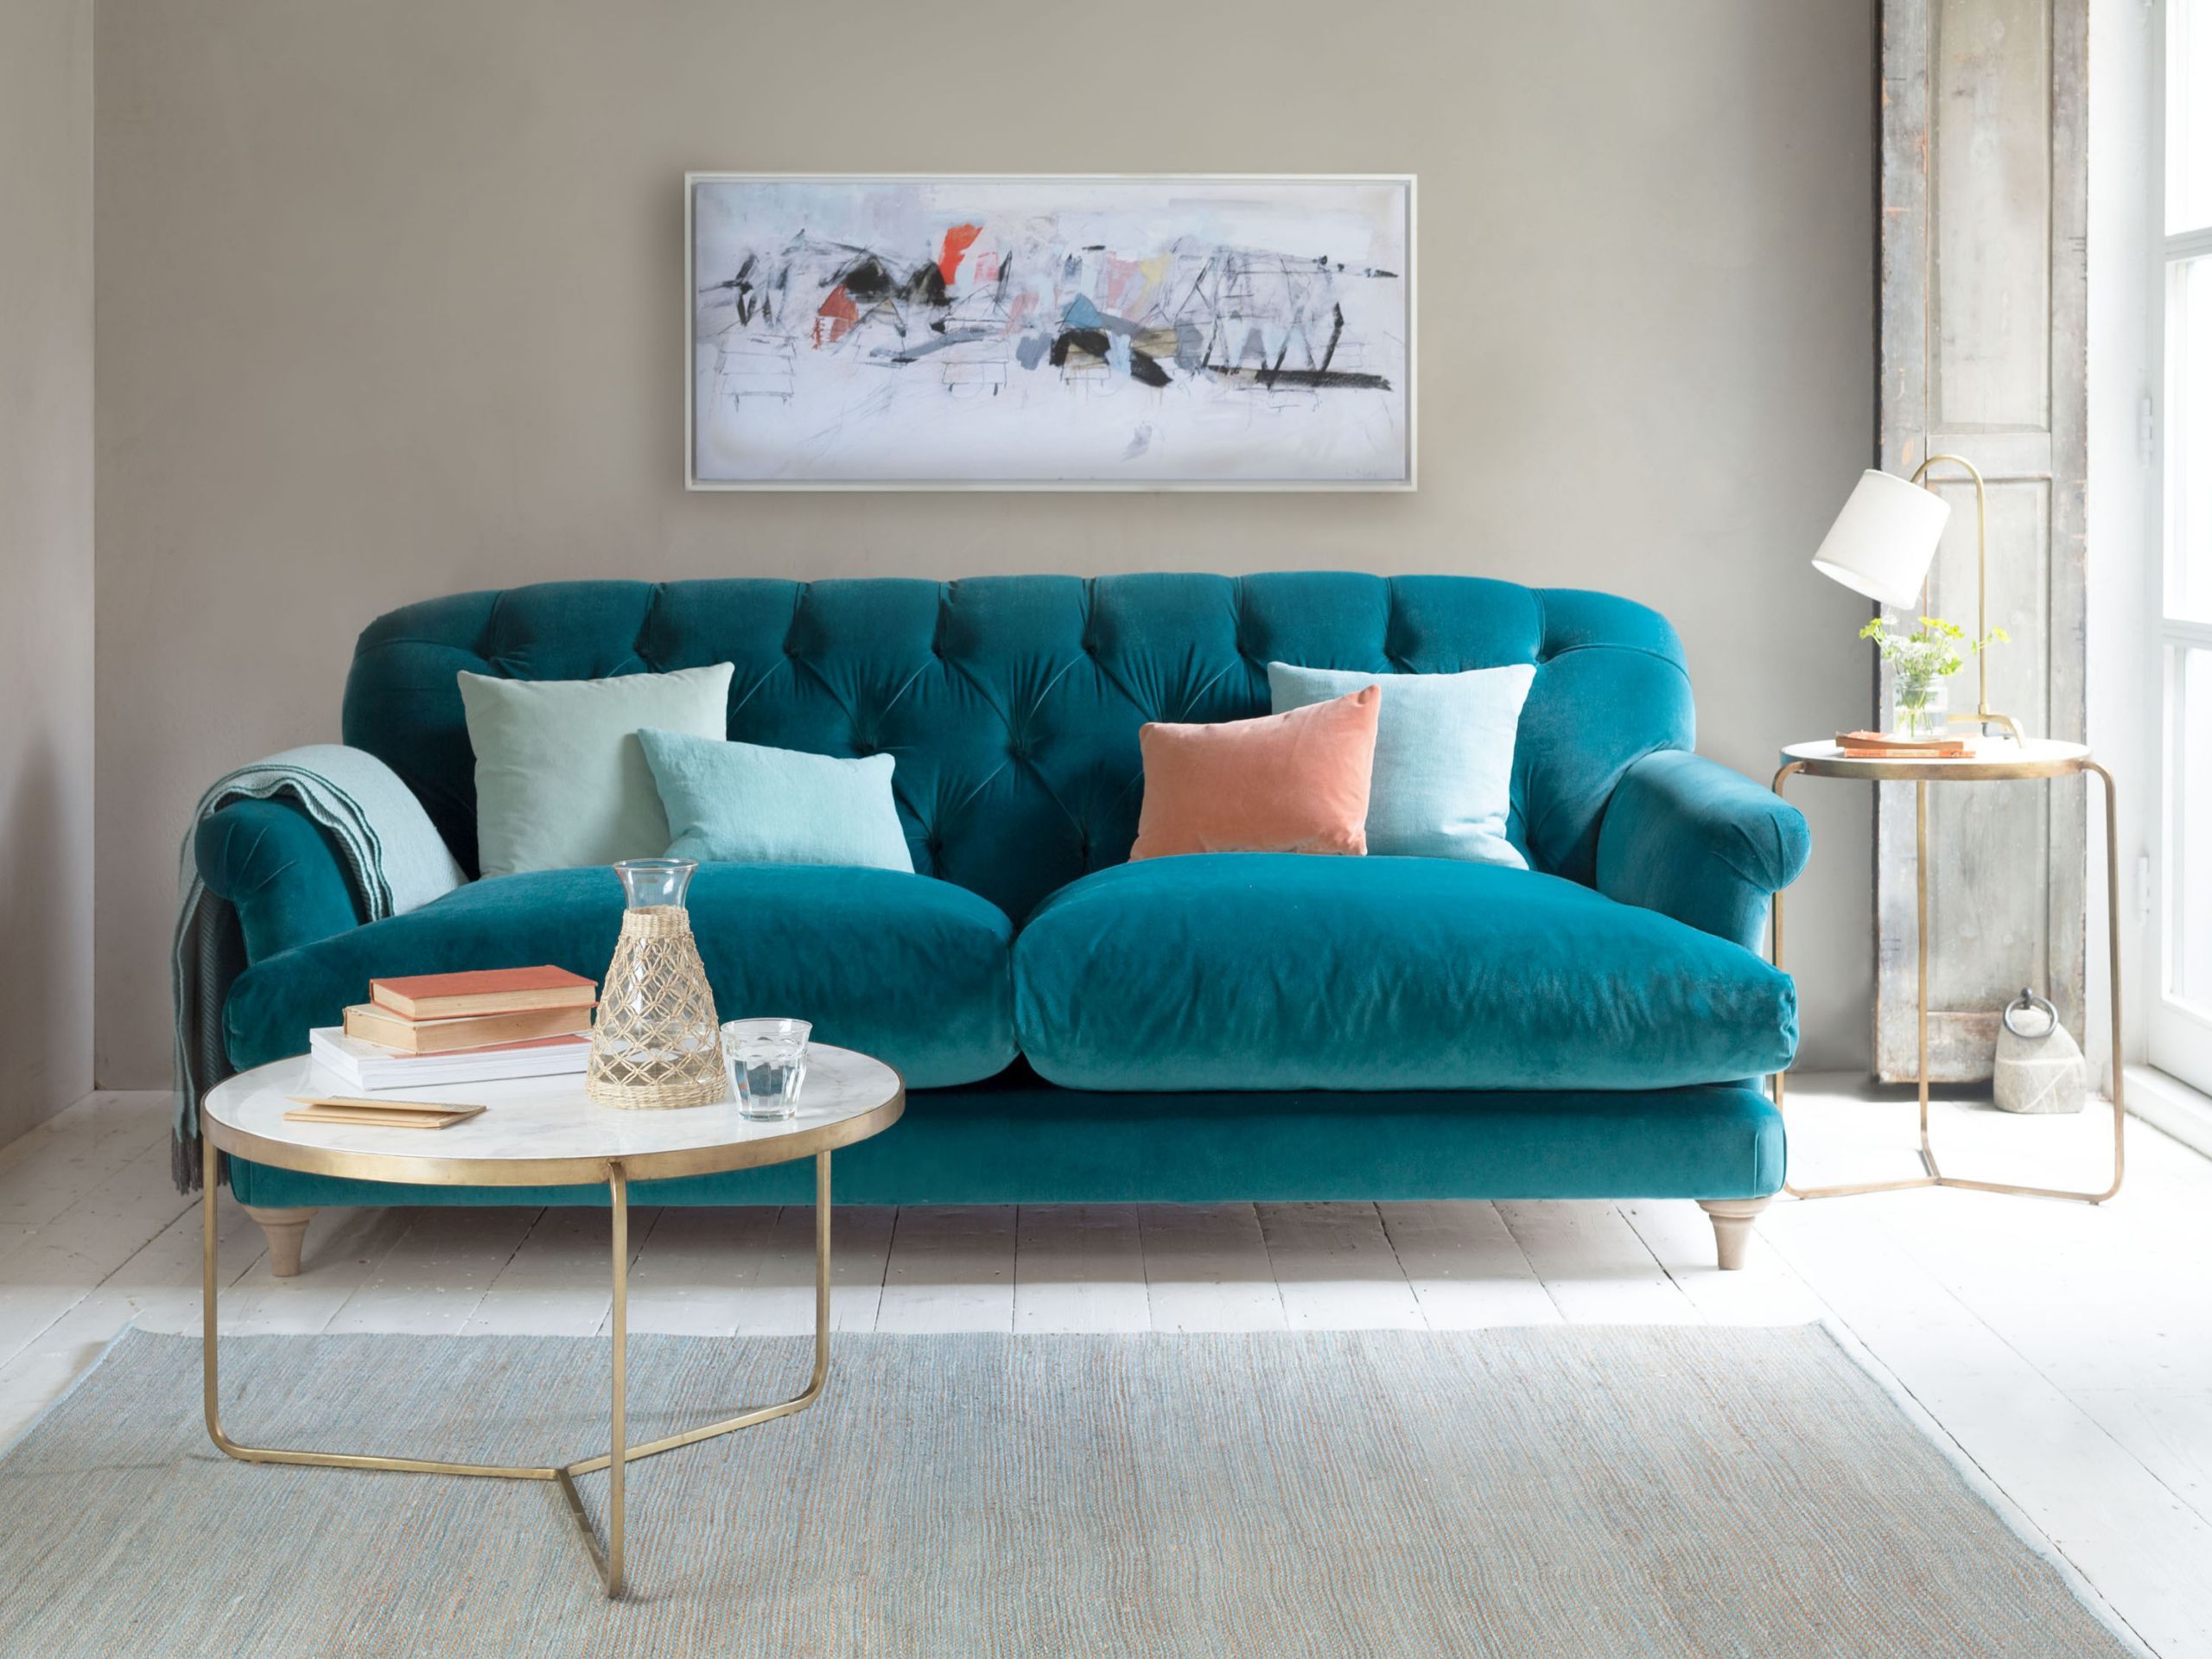 6 Velvet Sofas You Won't Be Able To Resist | Teal Couch Living Room With Regard To Modern Blue Linen Sofas (View 16 of 20)